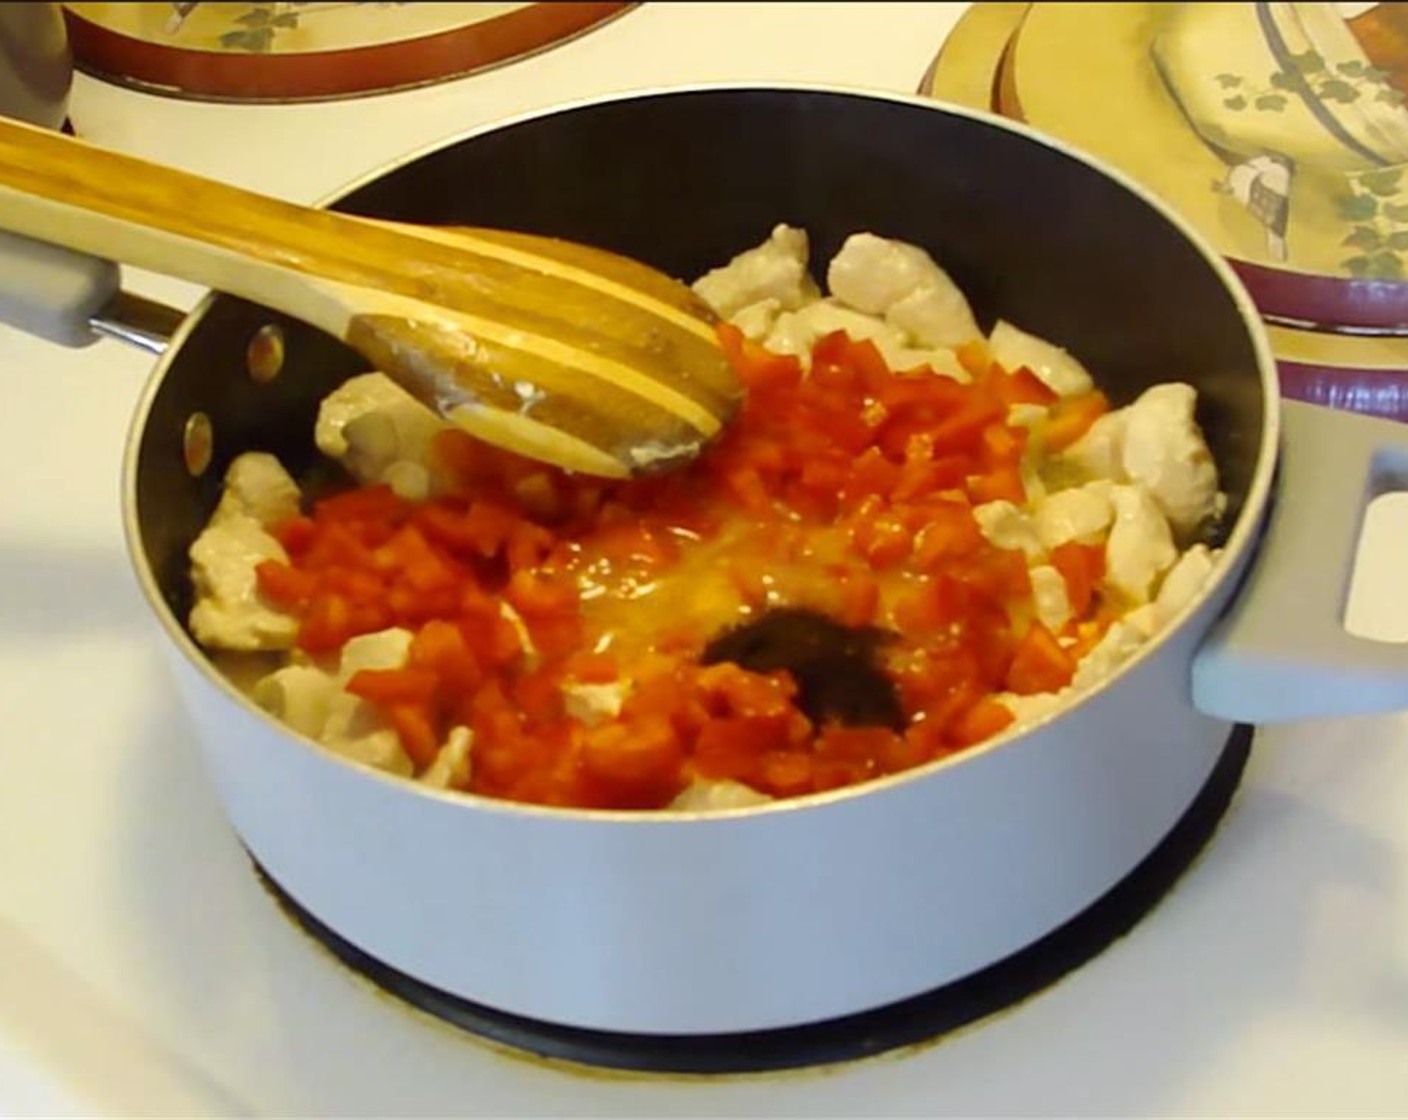 step 3 Add Red Bell Peppers (2), Italian Dressing (1/4 cup) and Chili Powder (1 Tbsp). Cook 3 minutes, or until chicken is done, stirring frequently. Add Chunky Salsa (1/2 cup) and Sour Cream (1/2 cup) and mix well.